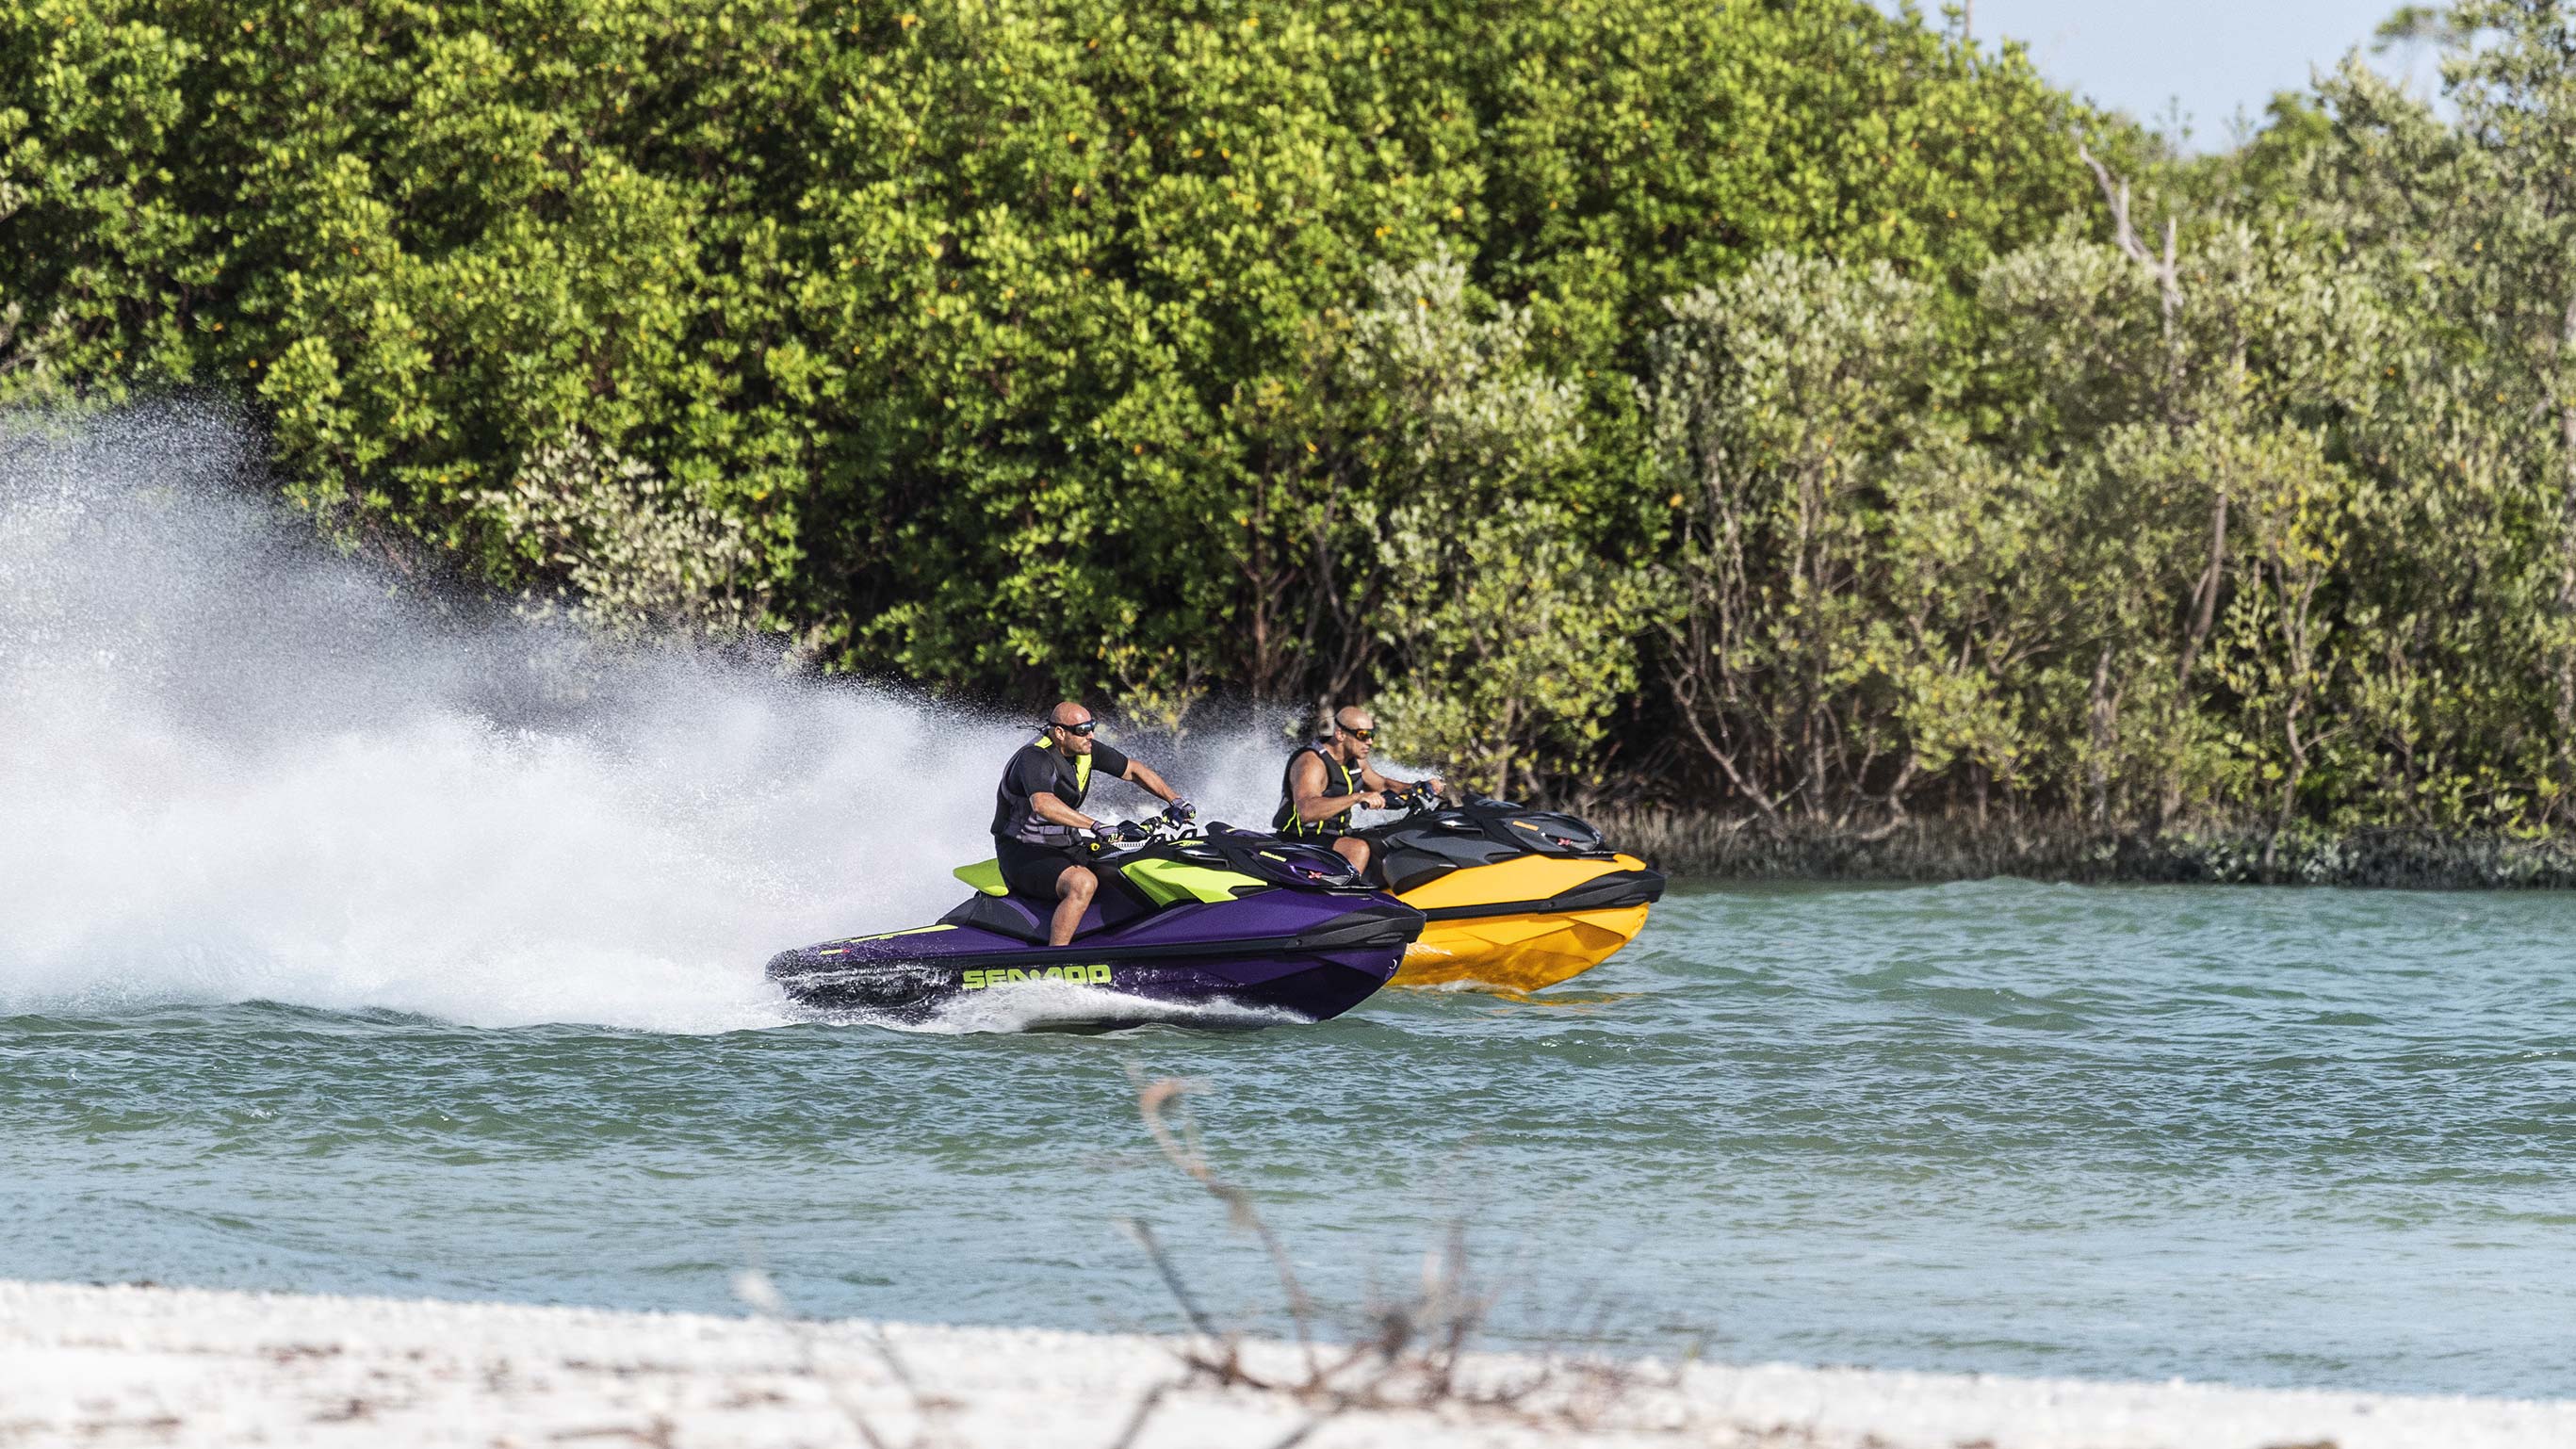 Two men riding Sea-Doo watercrafts very fast